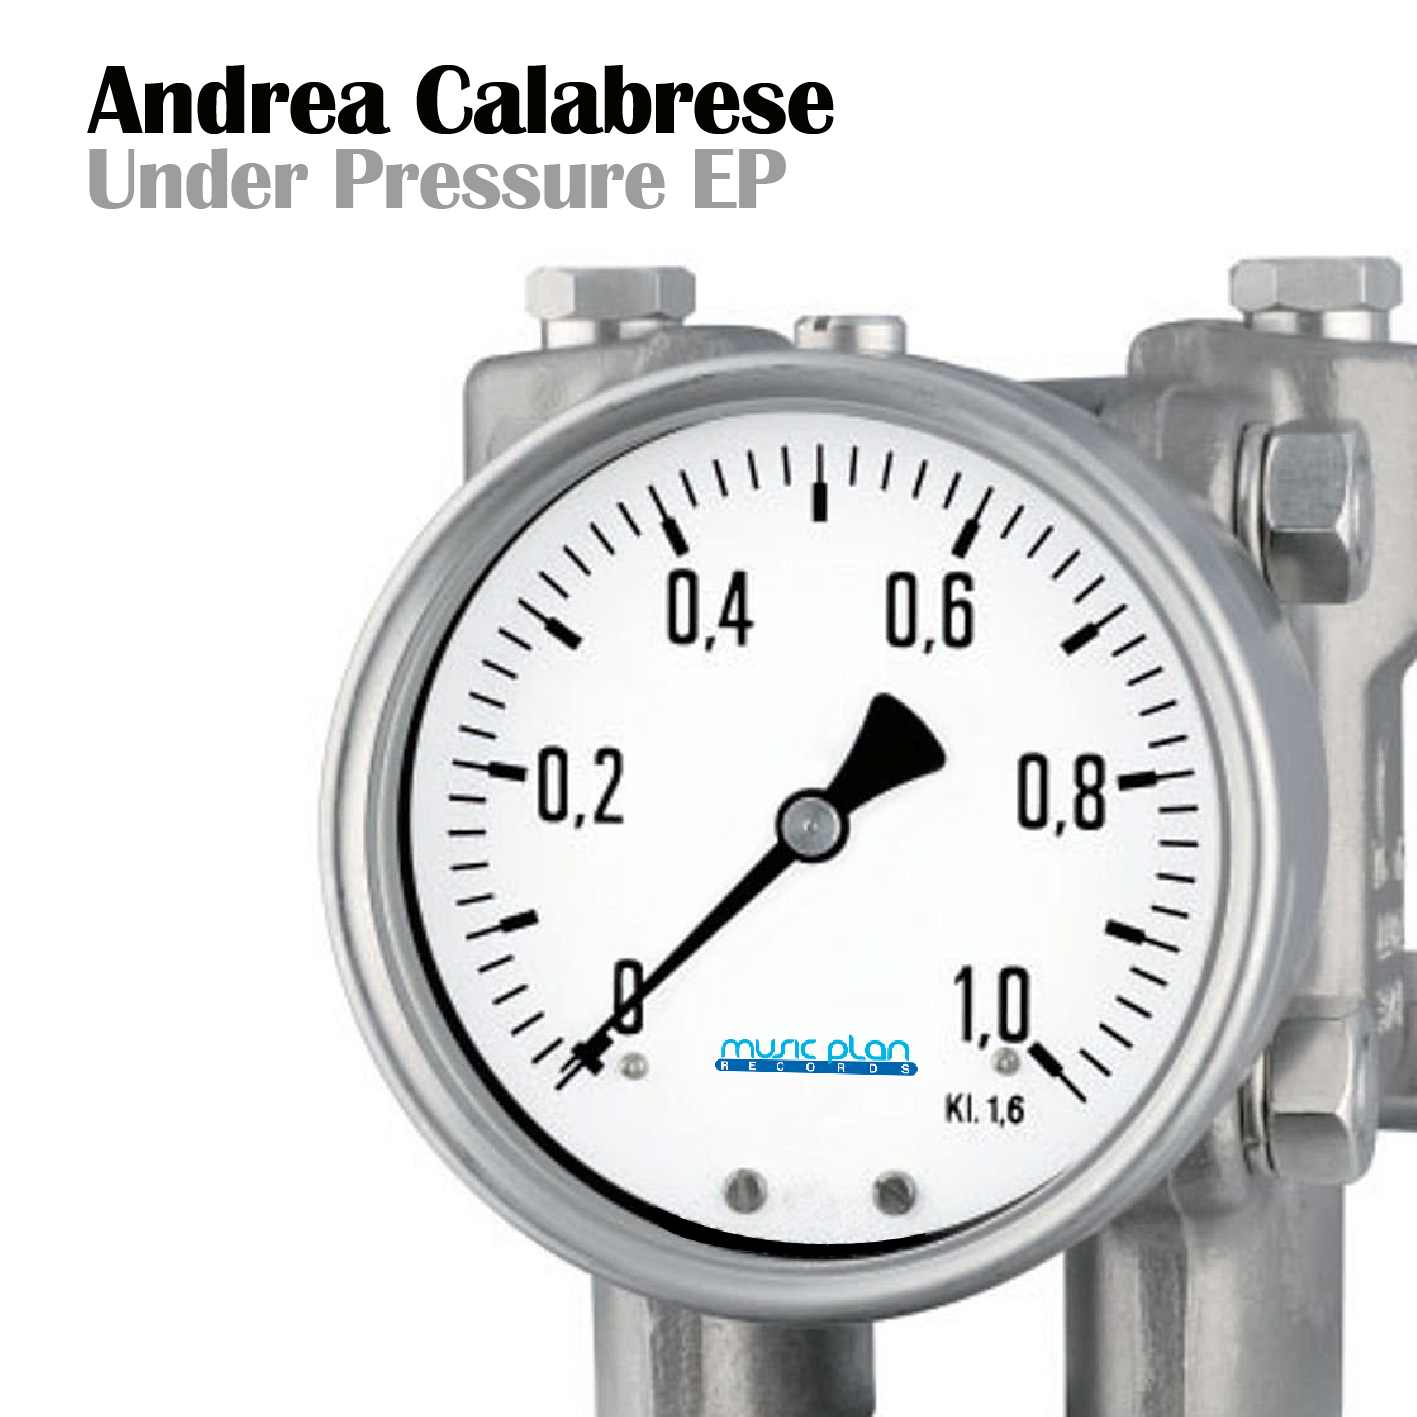 Andrea Calabrese - Under Pressure EP